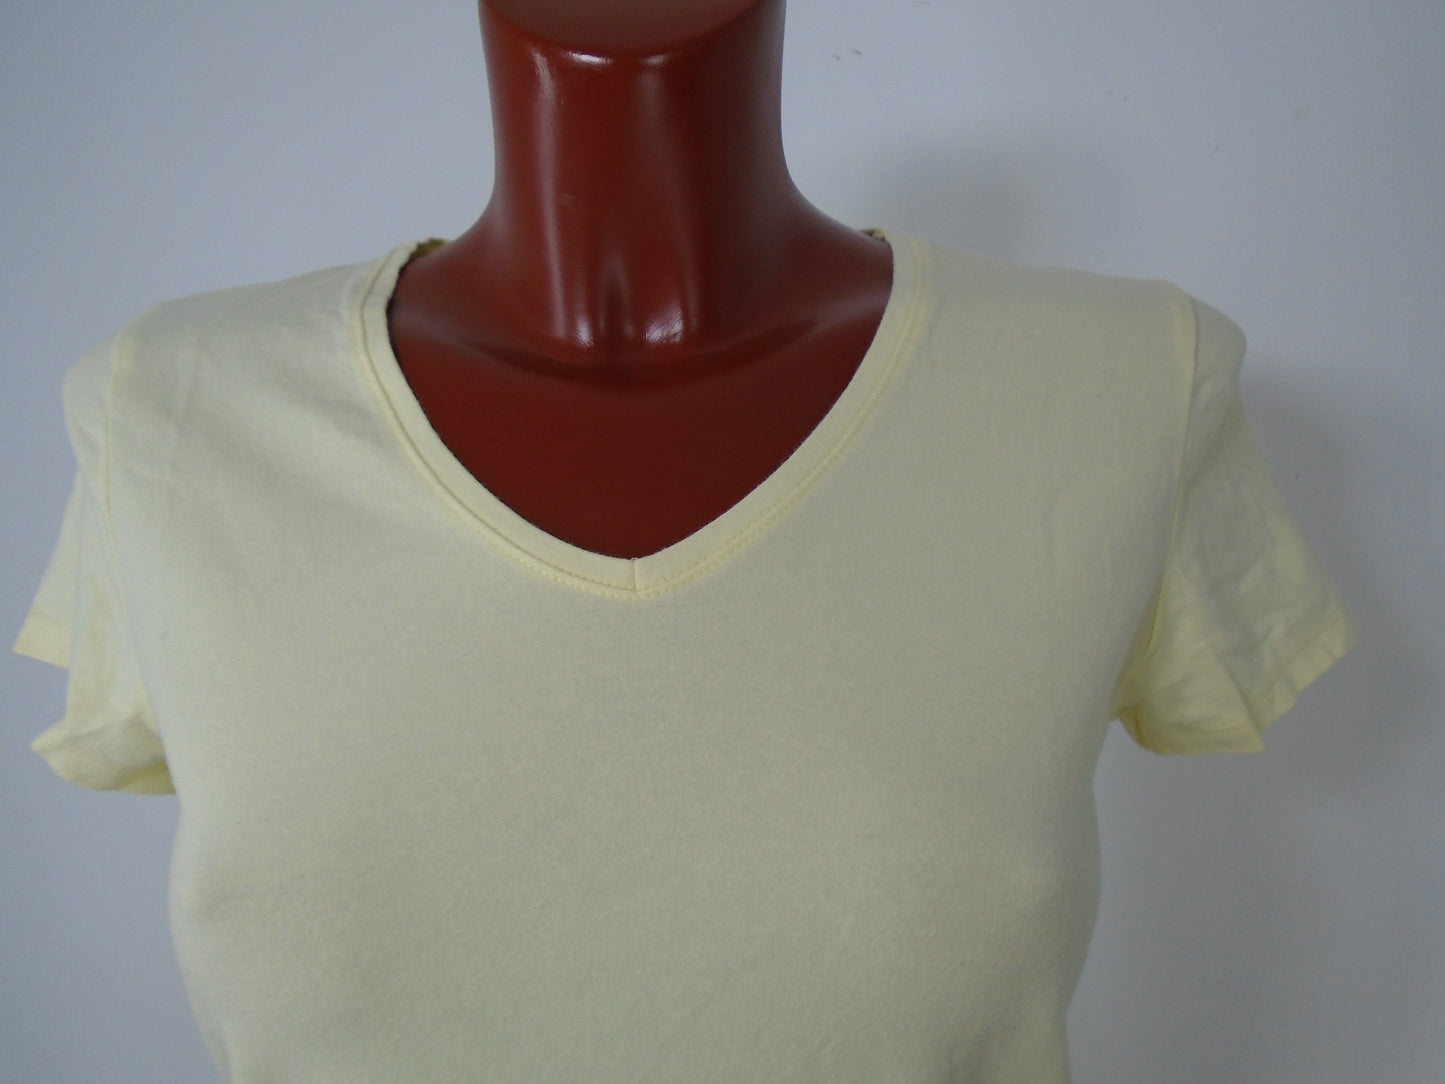 Women's T-Shirt Atmosphere. Yellow. XL. Used. Very good condition